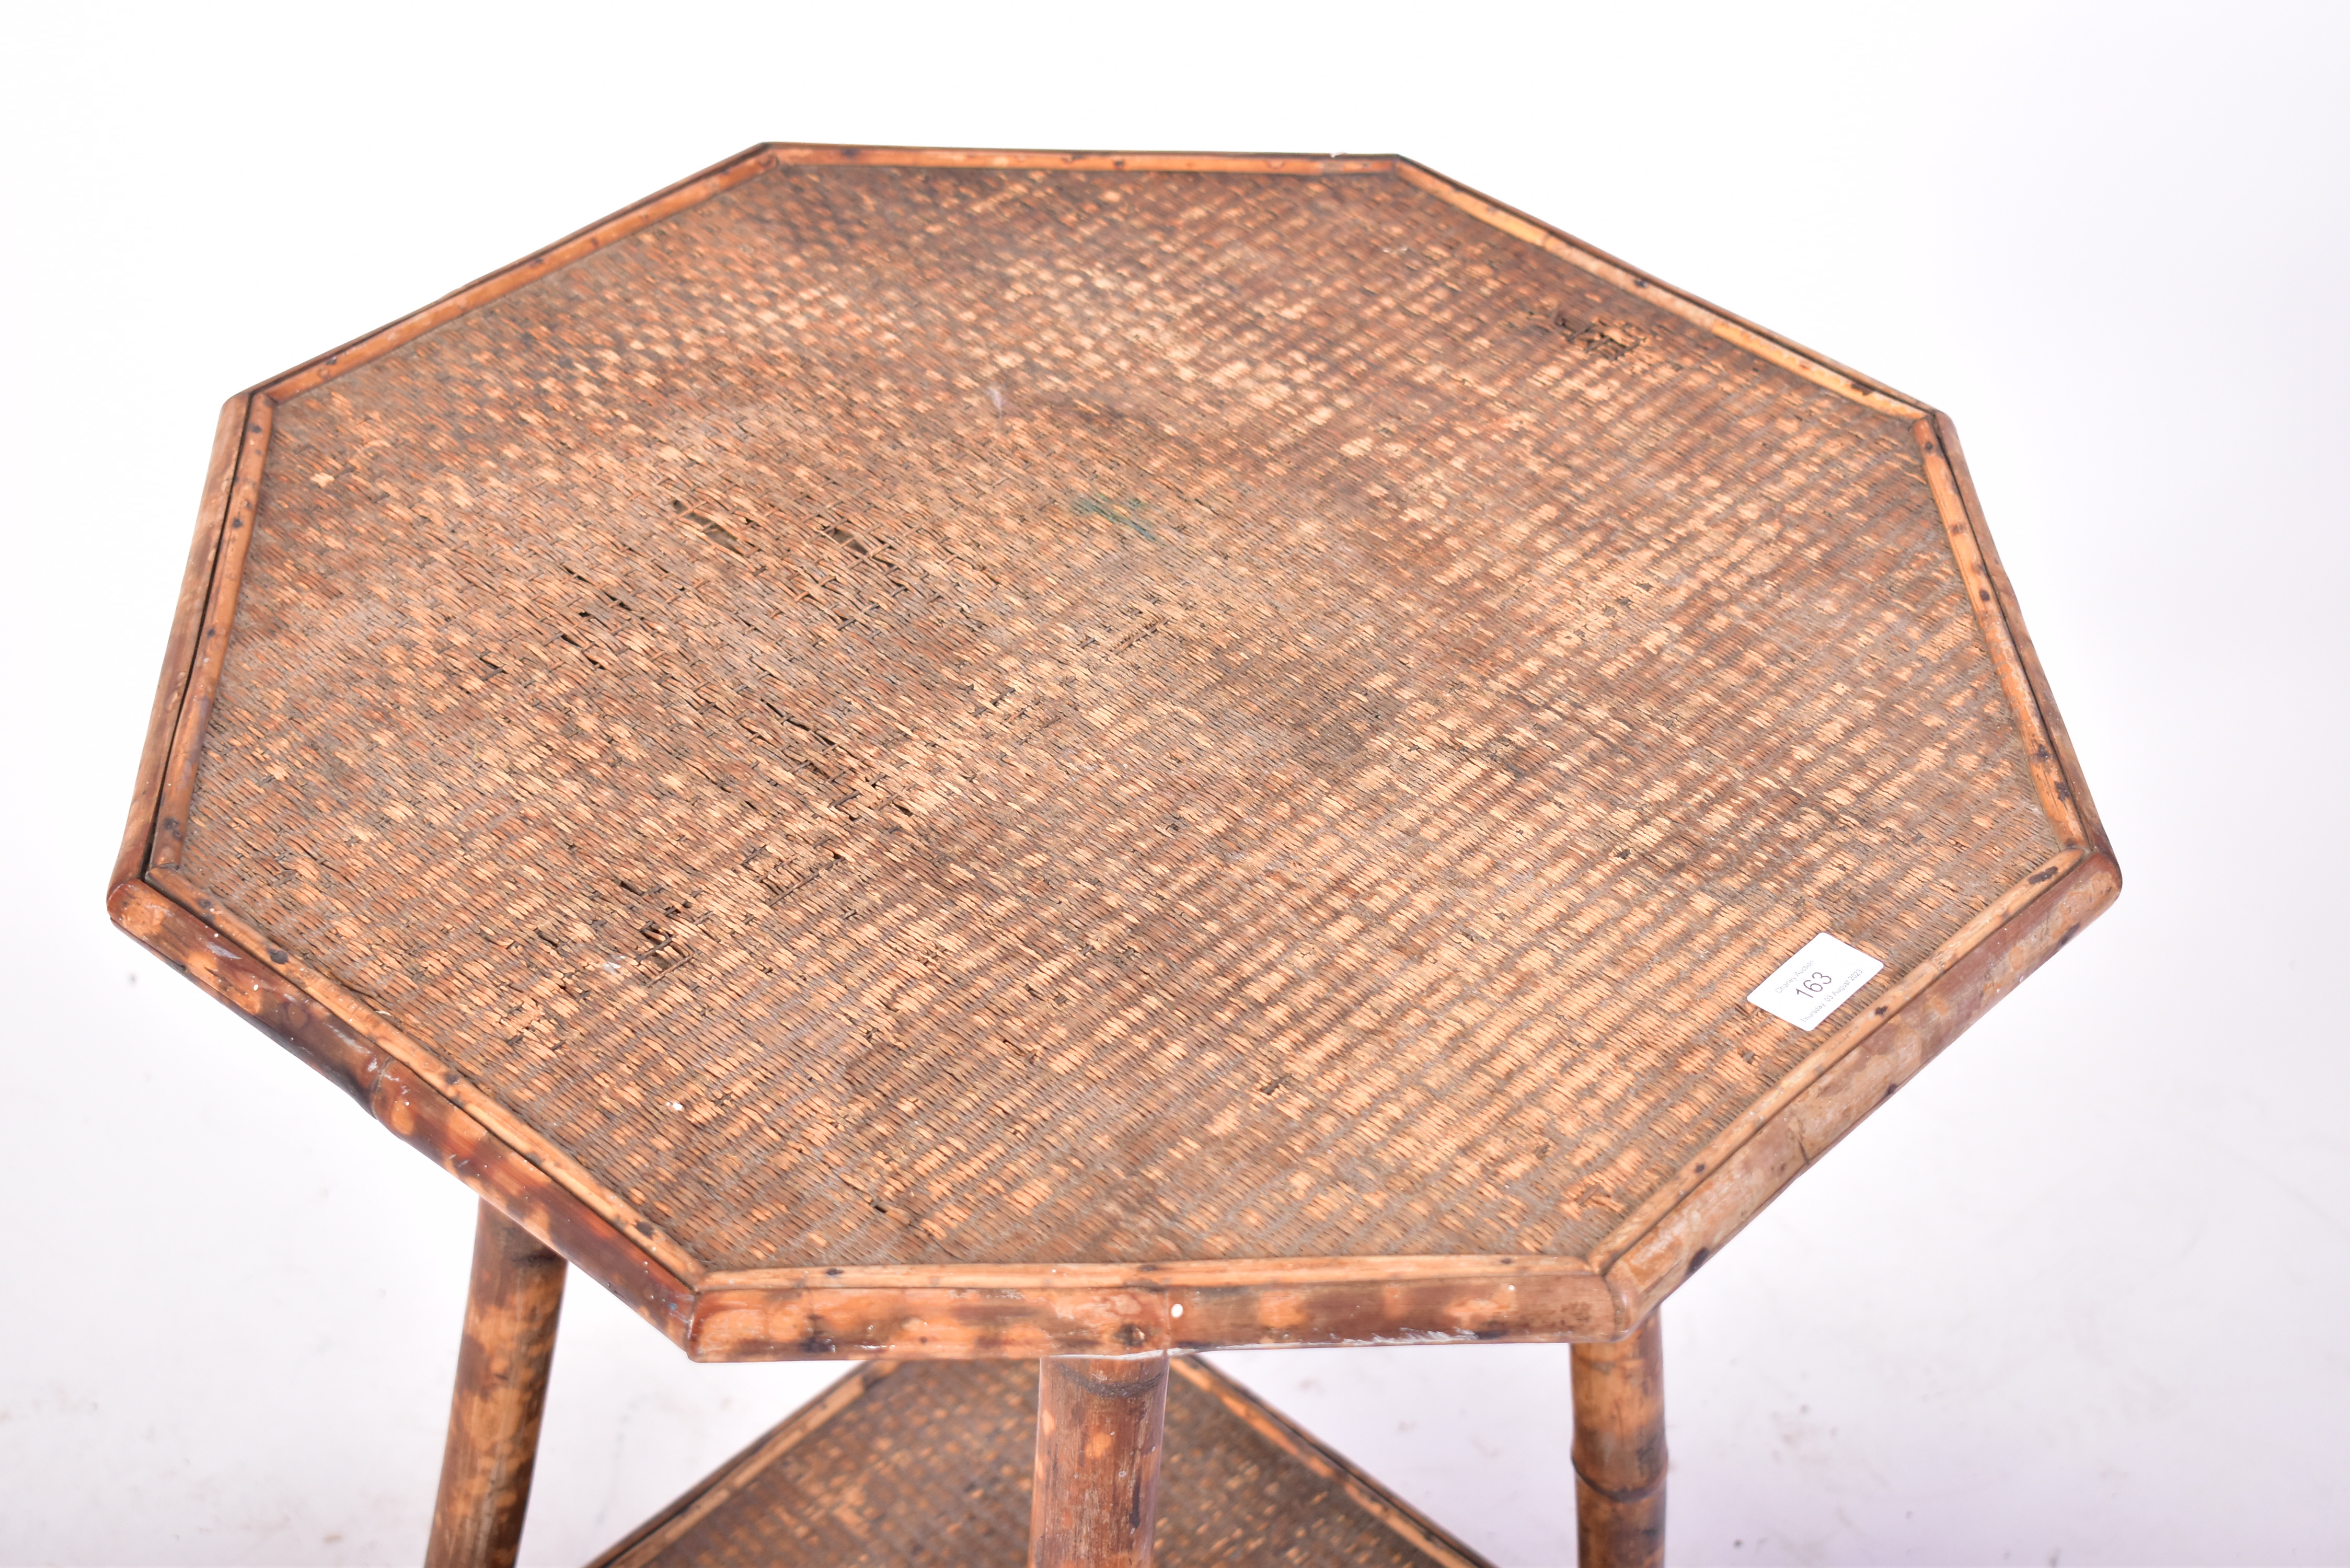 19TH CENTURY AESTHETIC MOVEMENT BAMBOO TABLE - Image 2 of 4